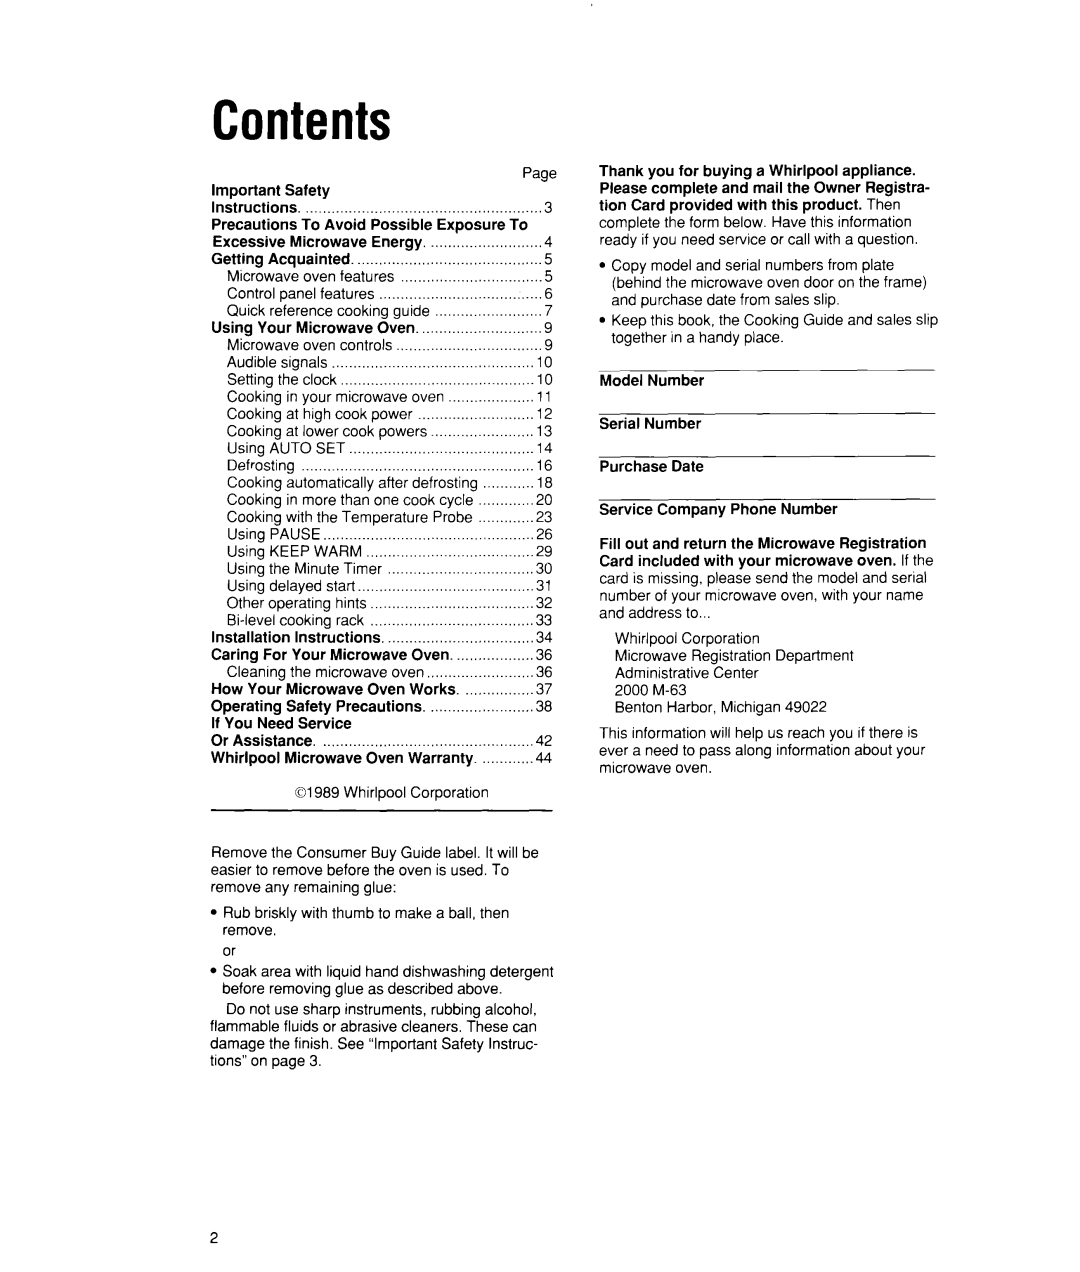 Whirlpool MW7500XW manual Contents 